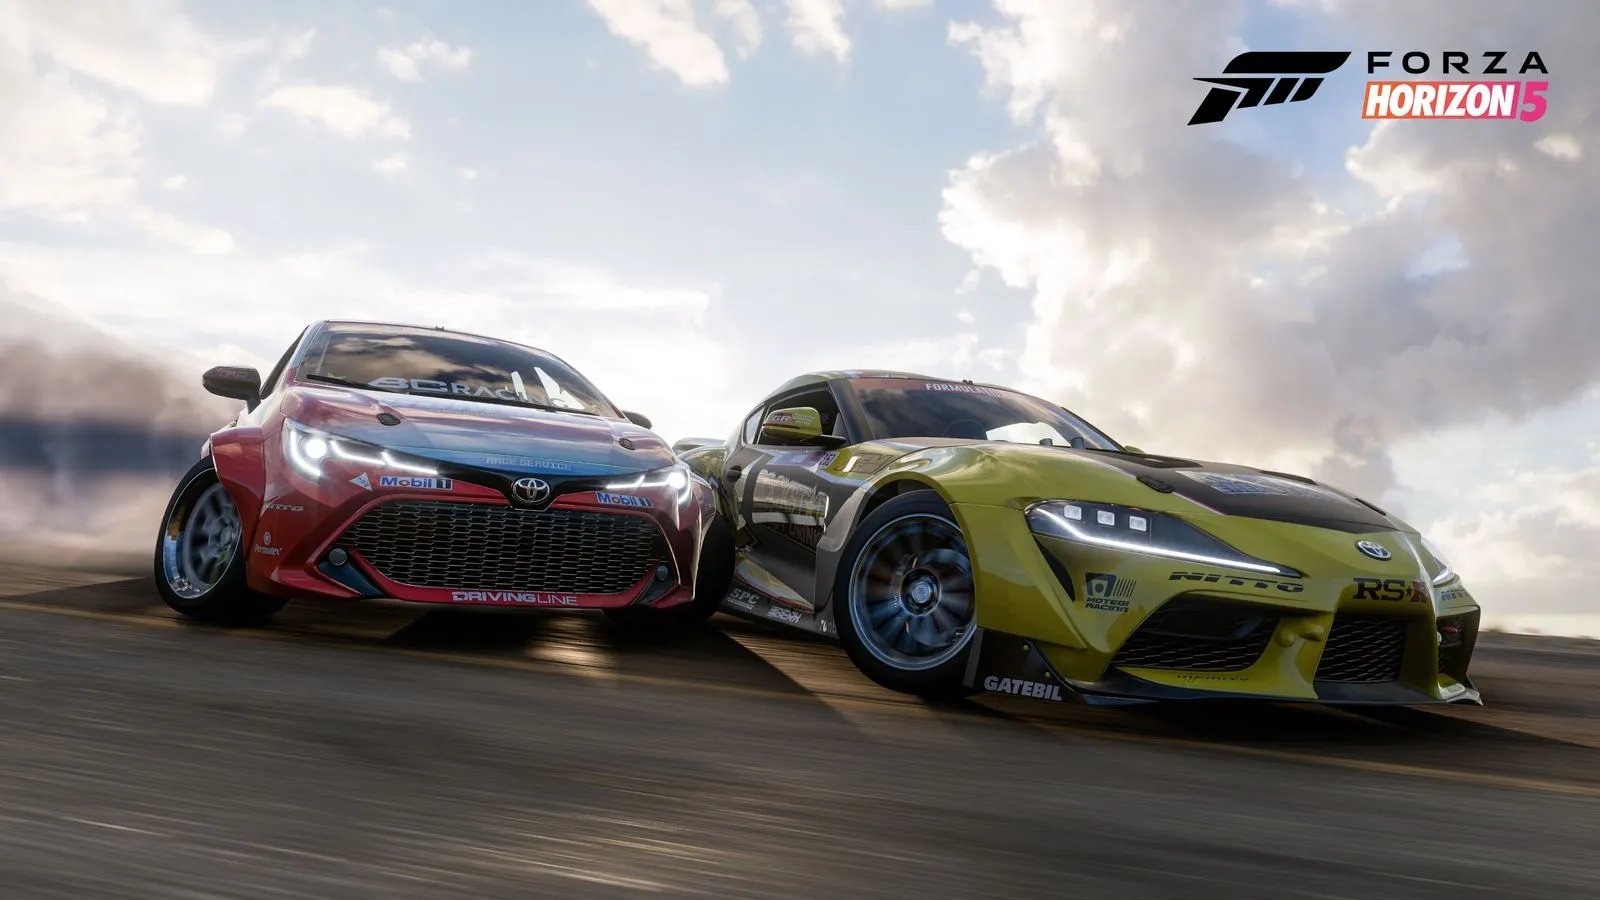 Forza Motorsport is coming back in spring 2023